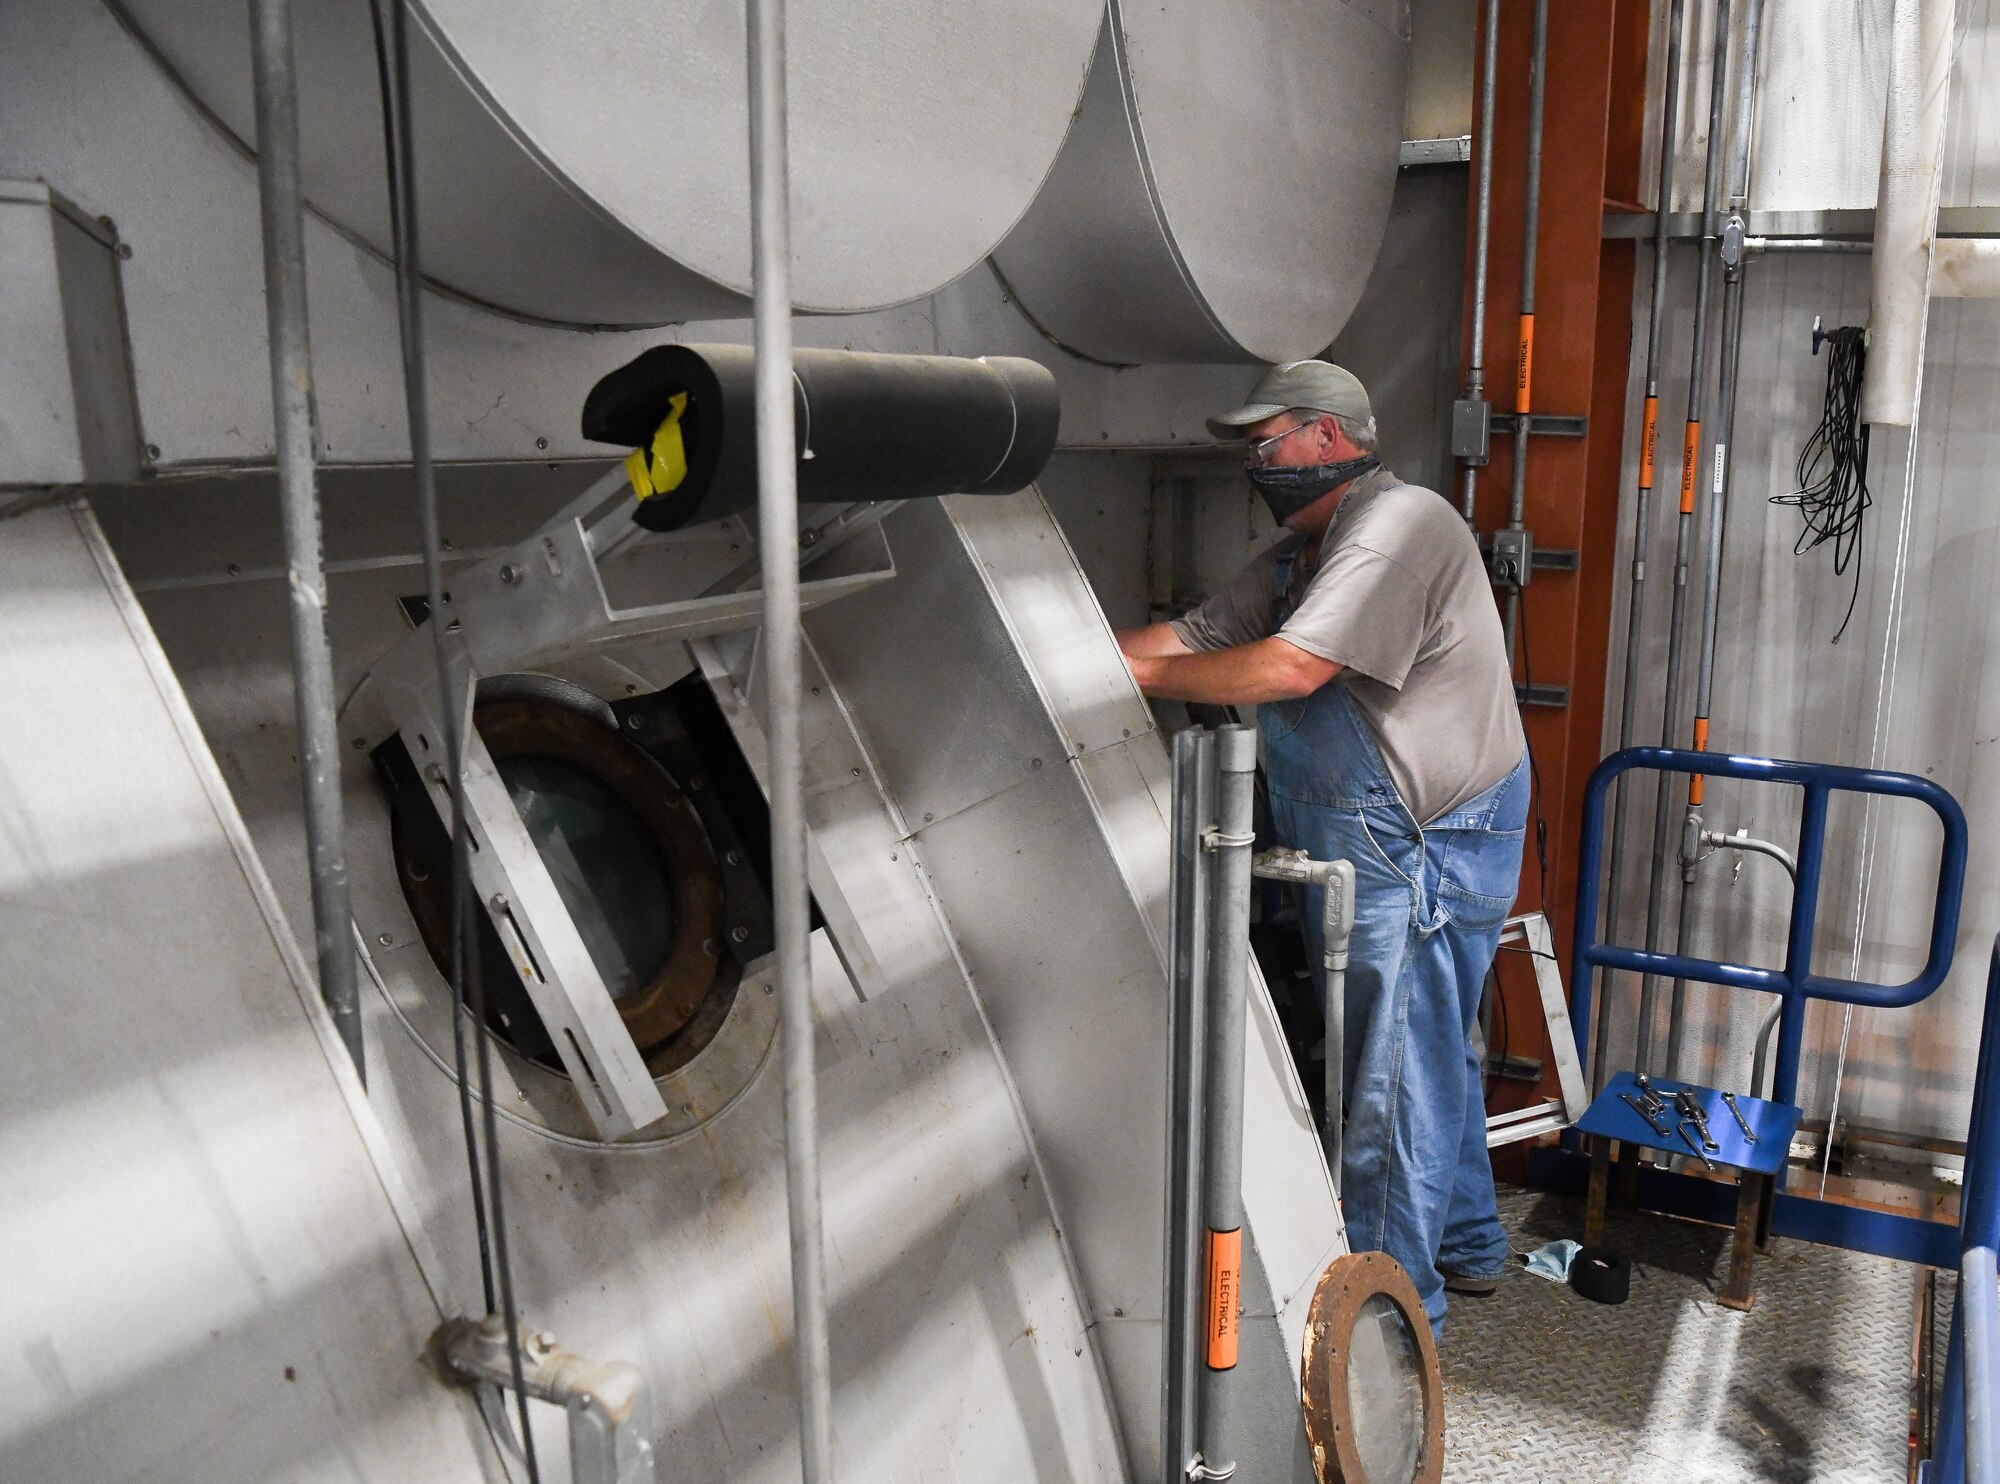 David Amonette, a boilermaker, works on a porthole of the test cell, July 28, 2020, in the J-6 Rocket Motor Test Facility at Arnold Air Force Base, Tenn. The facility allows for the ground test and evaluation of solid-propellant rocket motors at simulated altitudes. (U.S. Air Force photo by Jill Pickett)